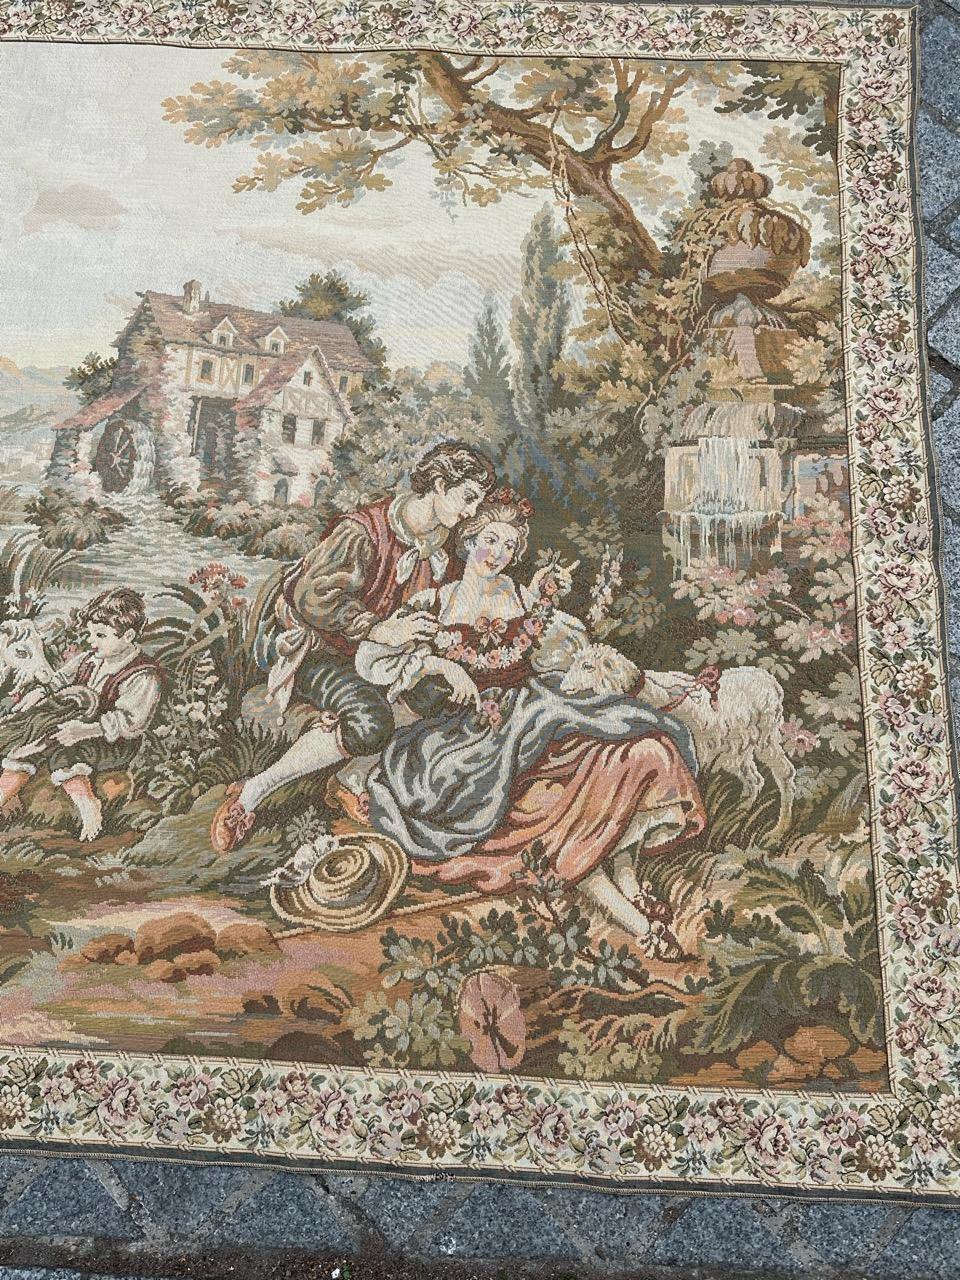 Elevate your space with a charming French tapestry featuring a gallant village scene. Woven with precision on Jacquard looms in France, this masterpiece showcases couples by the river, playful children, and adorable animals like lambs, goats, and a